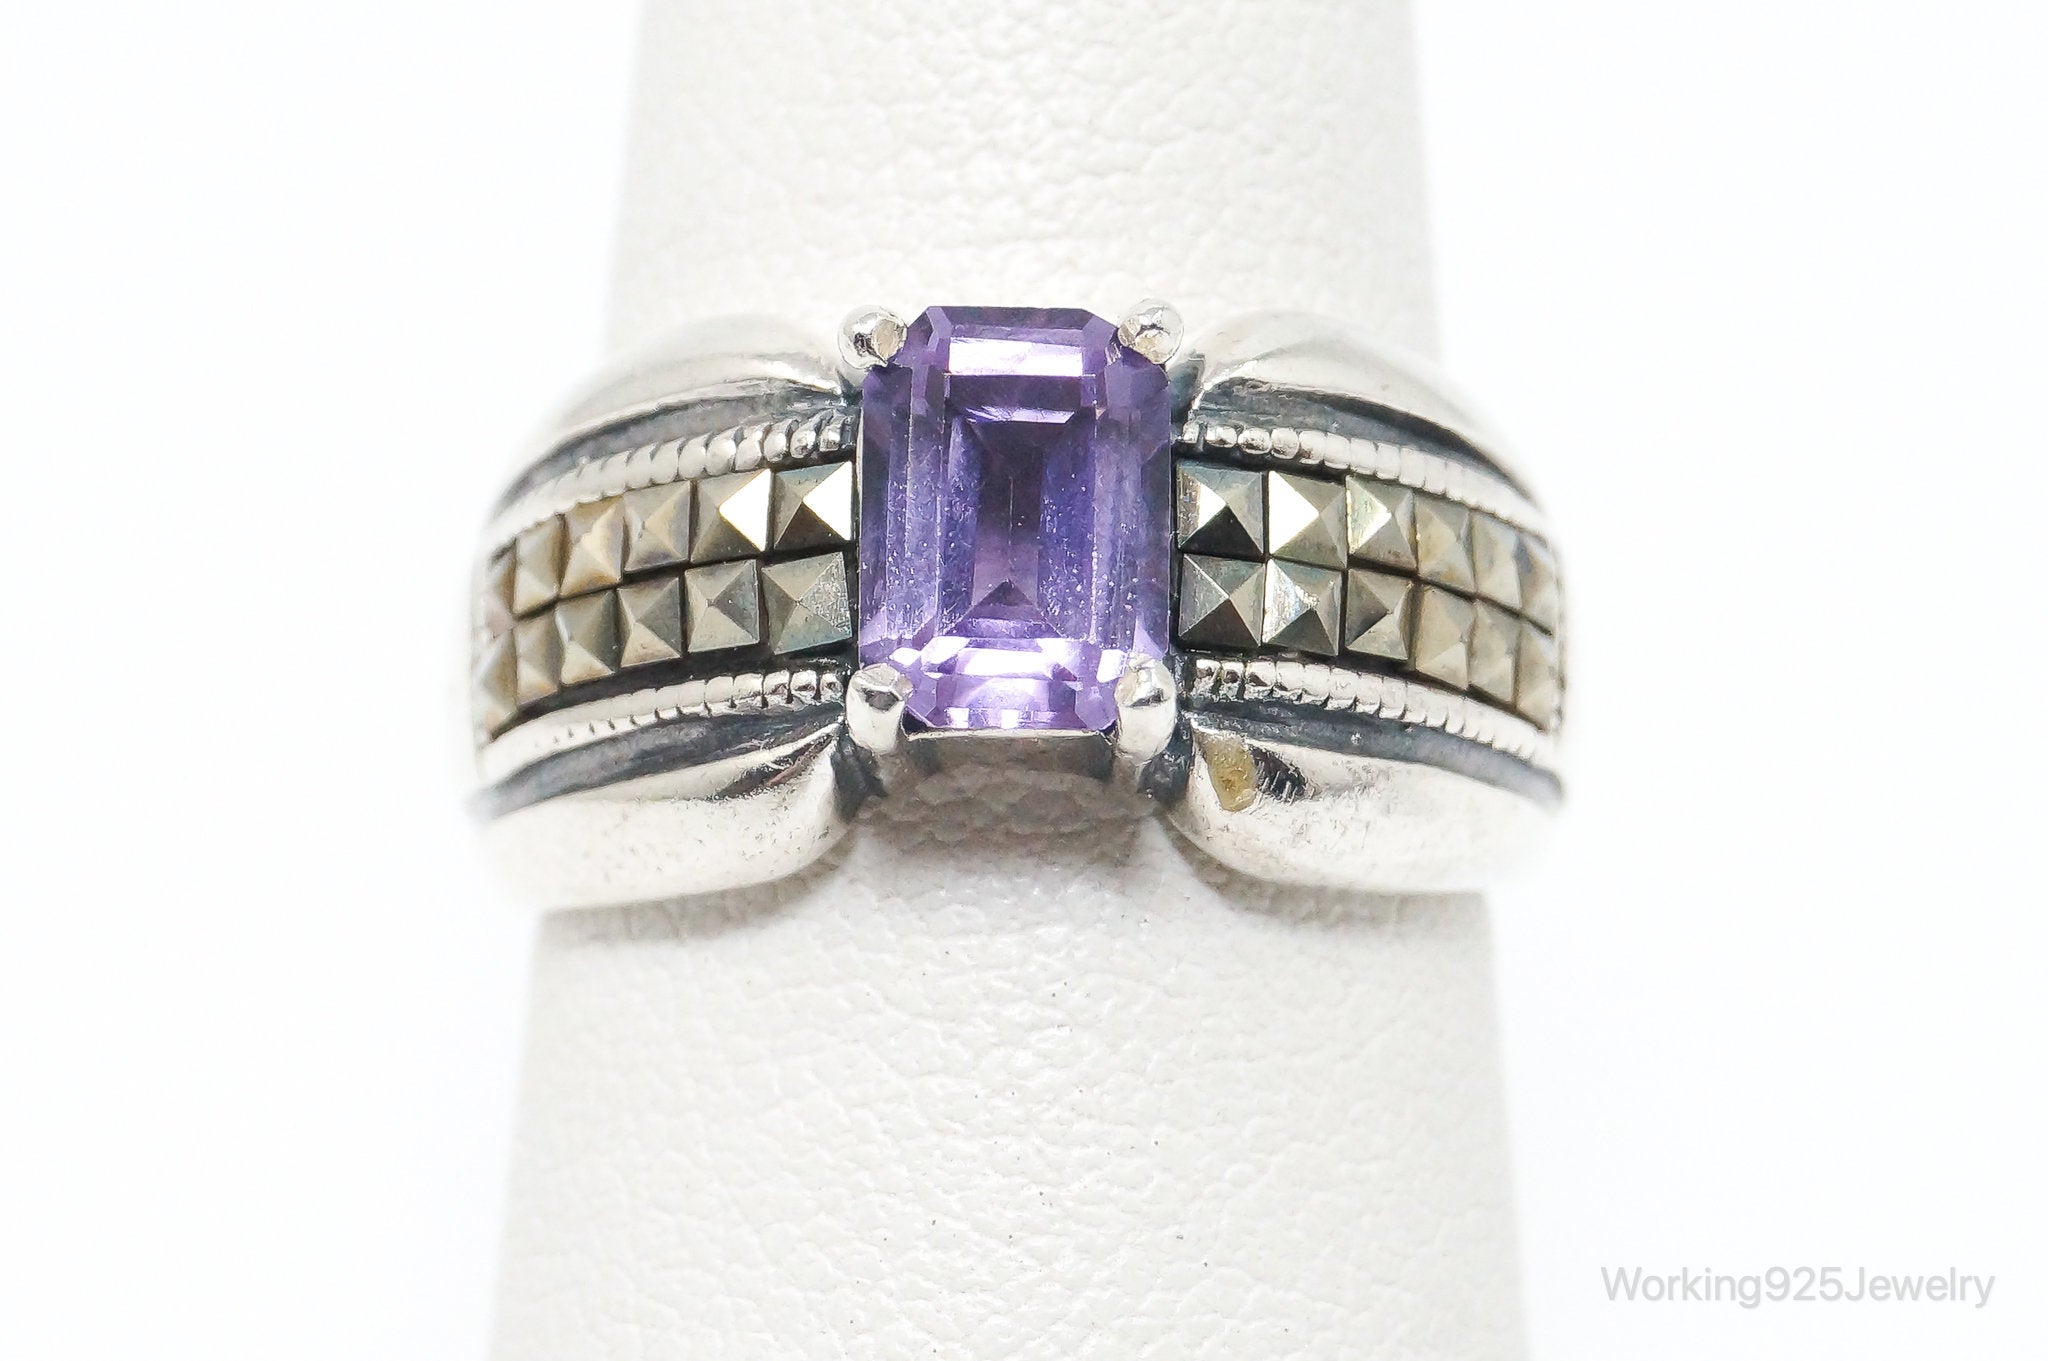 Vintage Art Deco Amethyst Marcasite Sterling Silver Ring - Size 6